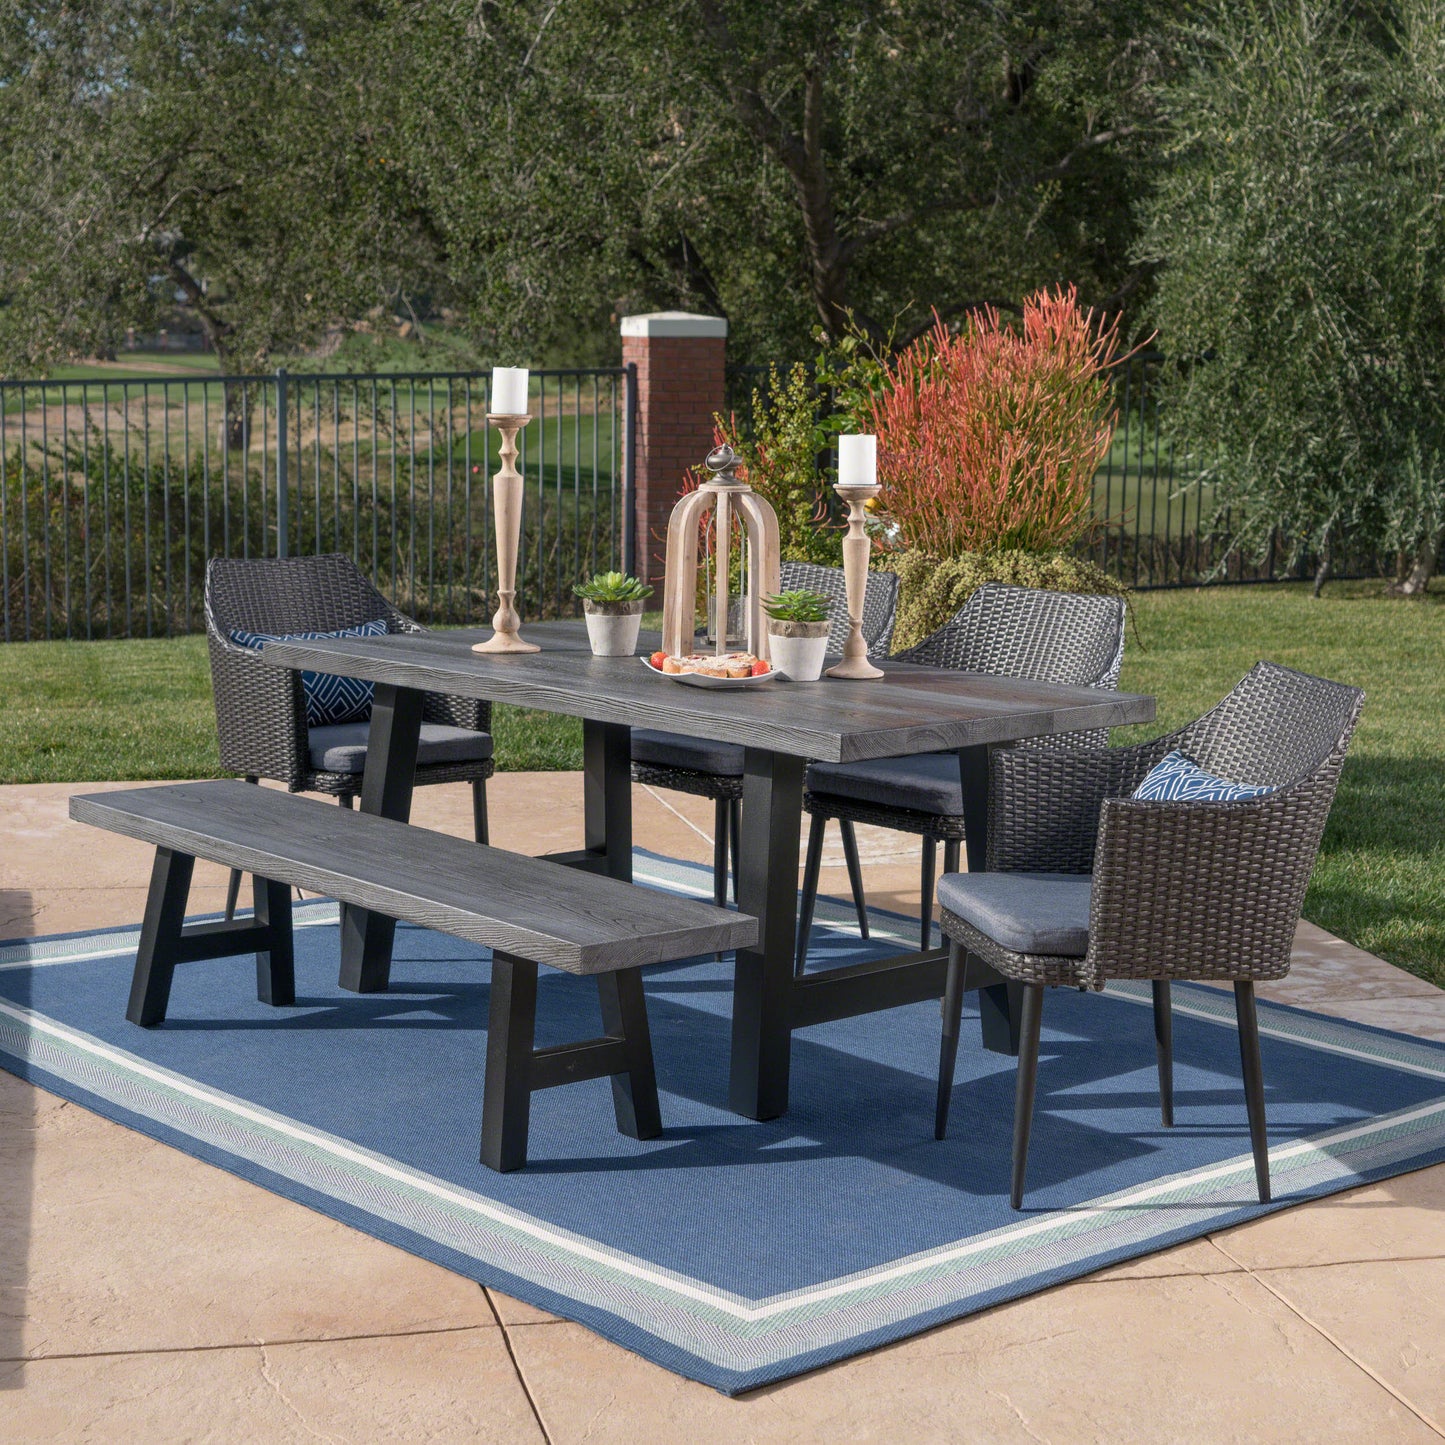 Blanche Outdoor 6 Piece Wicker Dining Set with Concrete Table and Bench